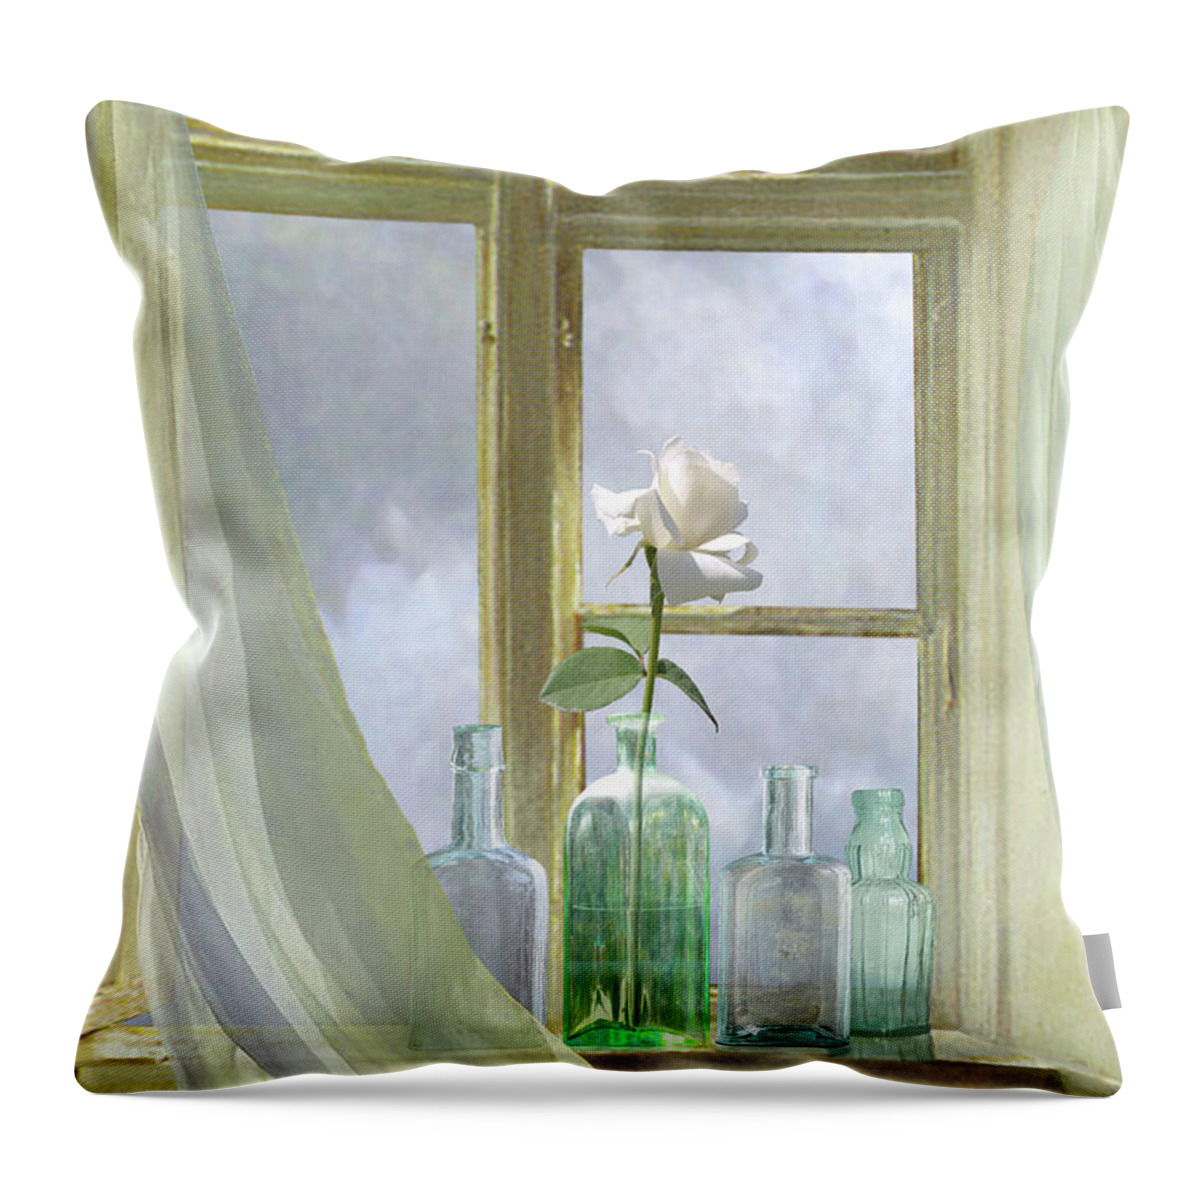 Curtains Throw Pillow featuring the digital art Open Window by M Spadecaller